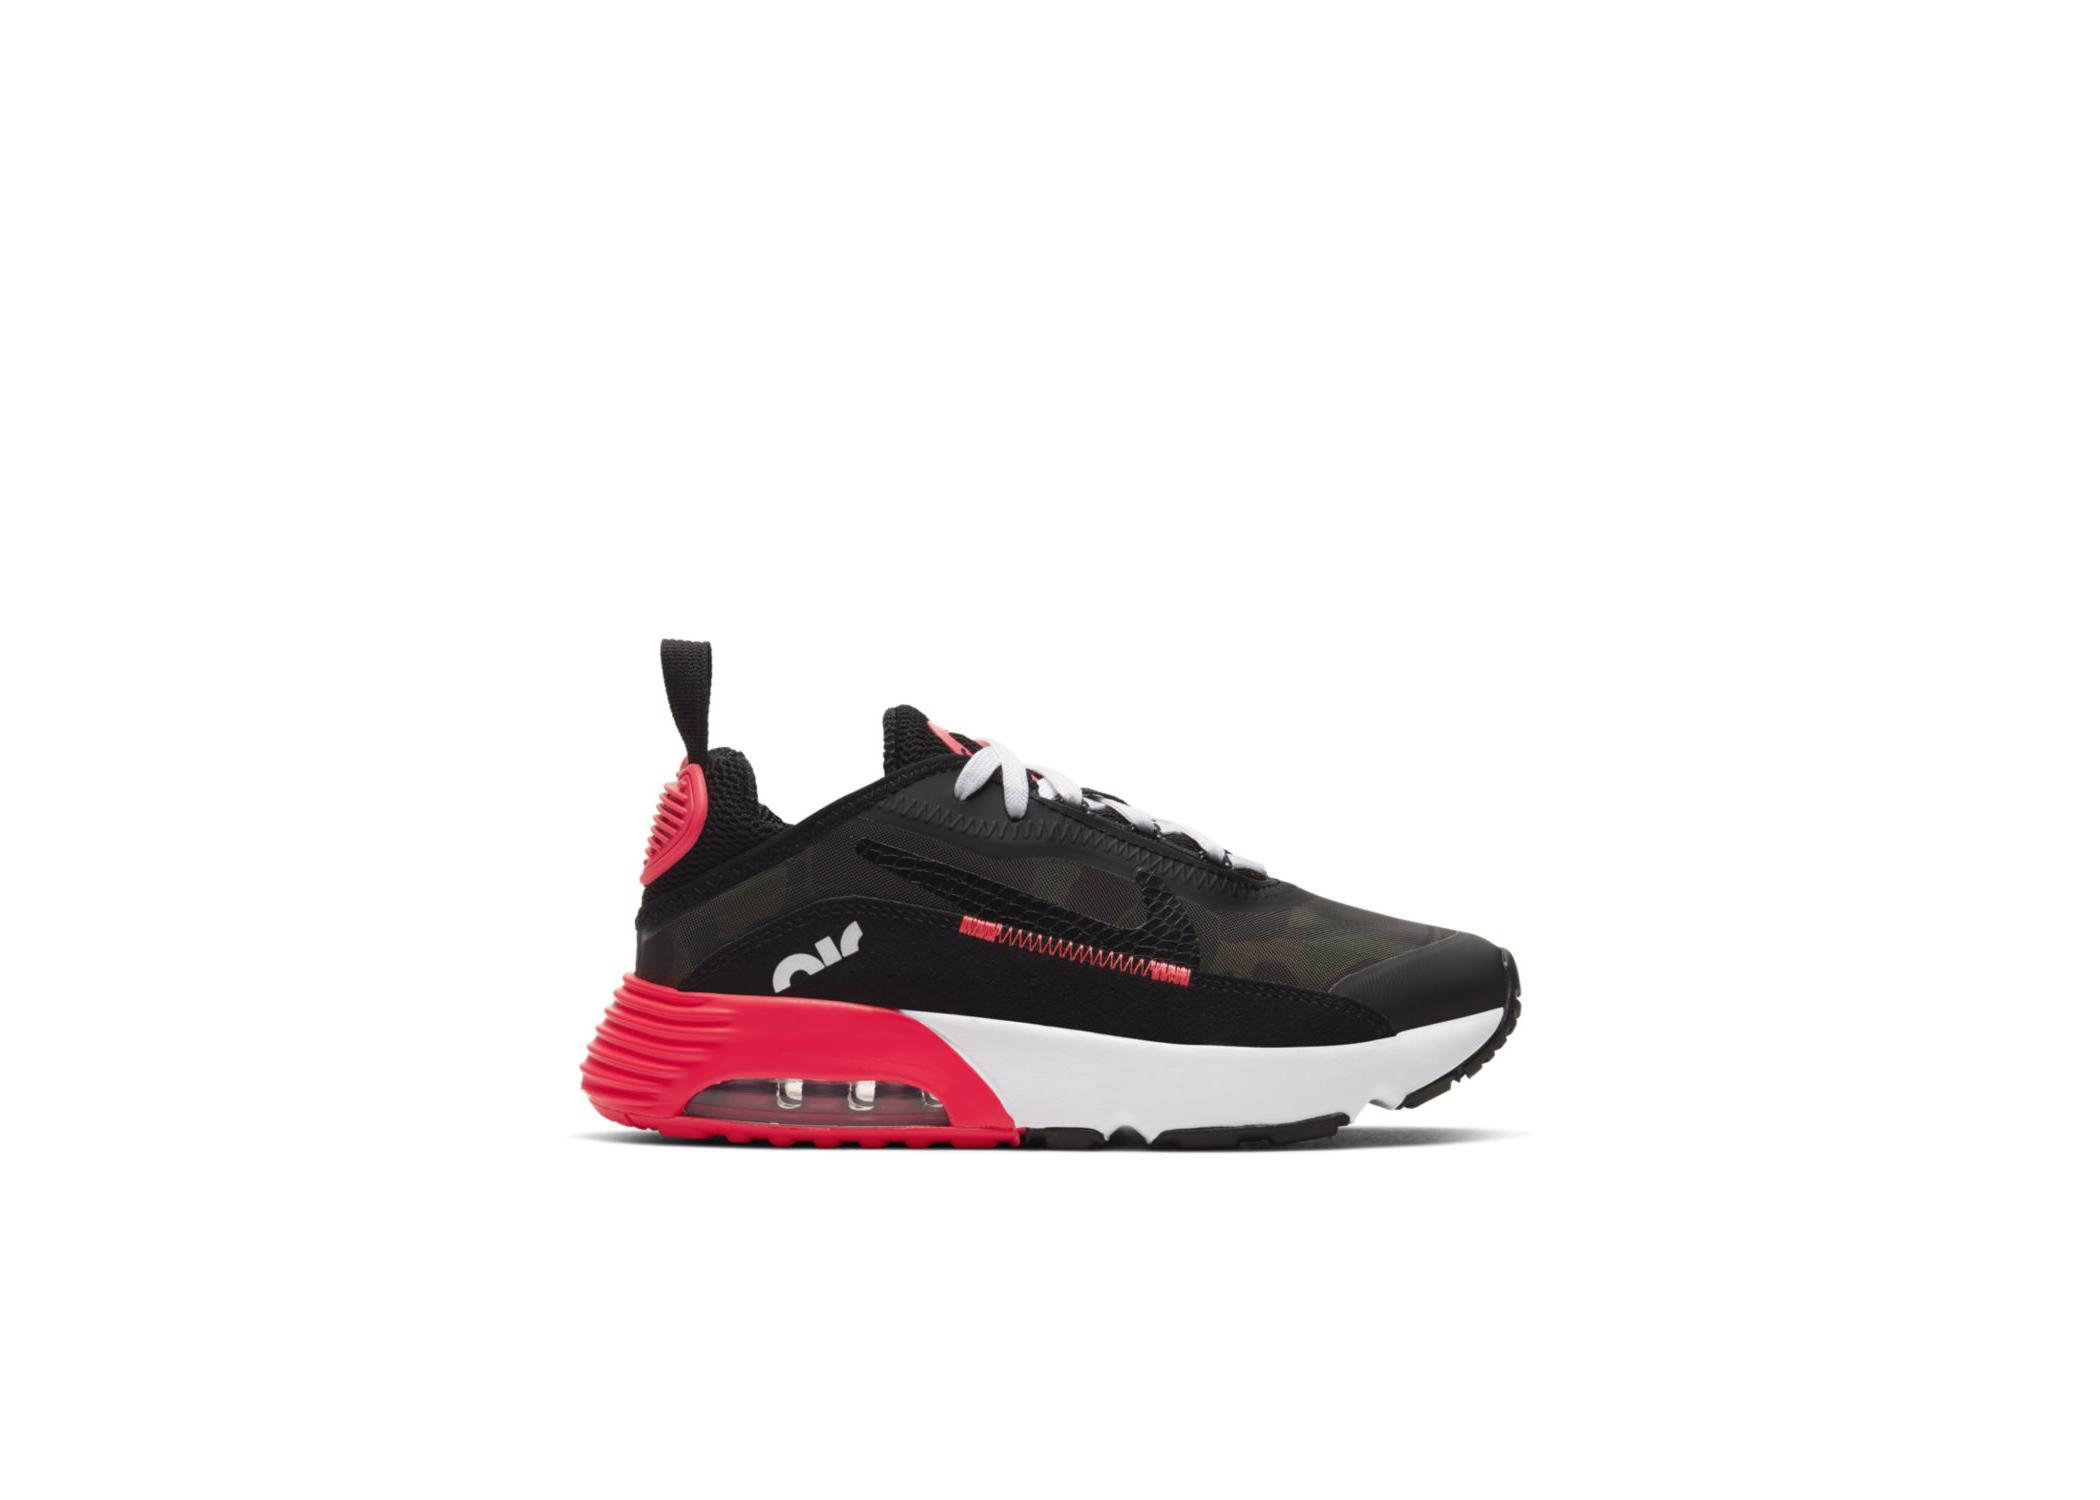 Air Max 2090 SP Infrared (PS) - CW7412-600